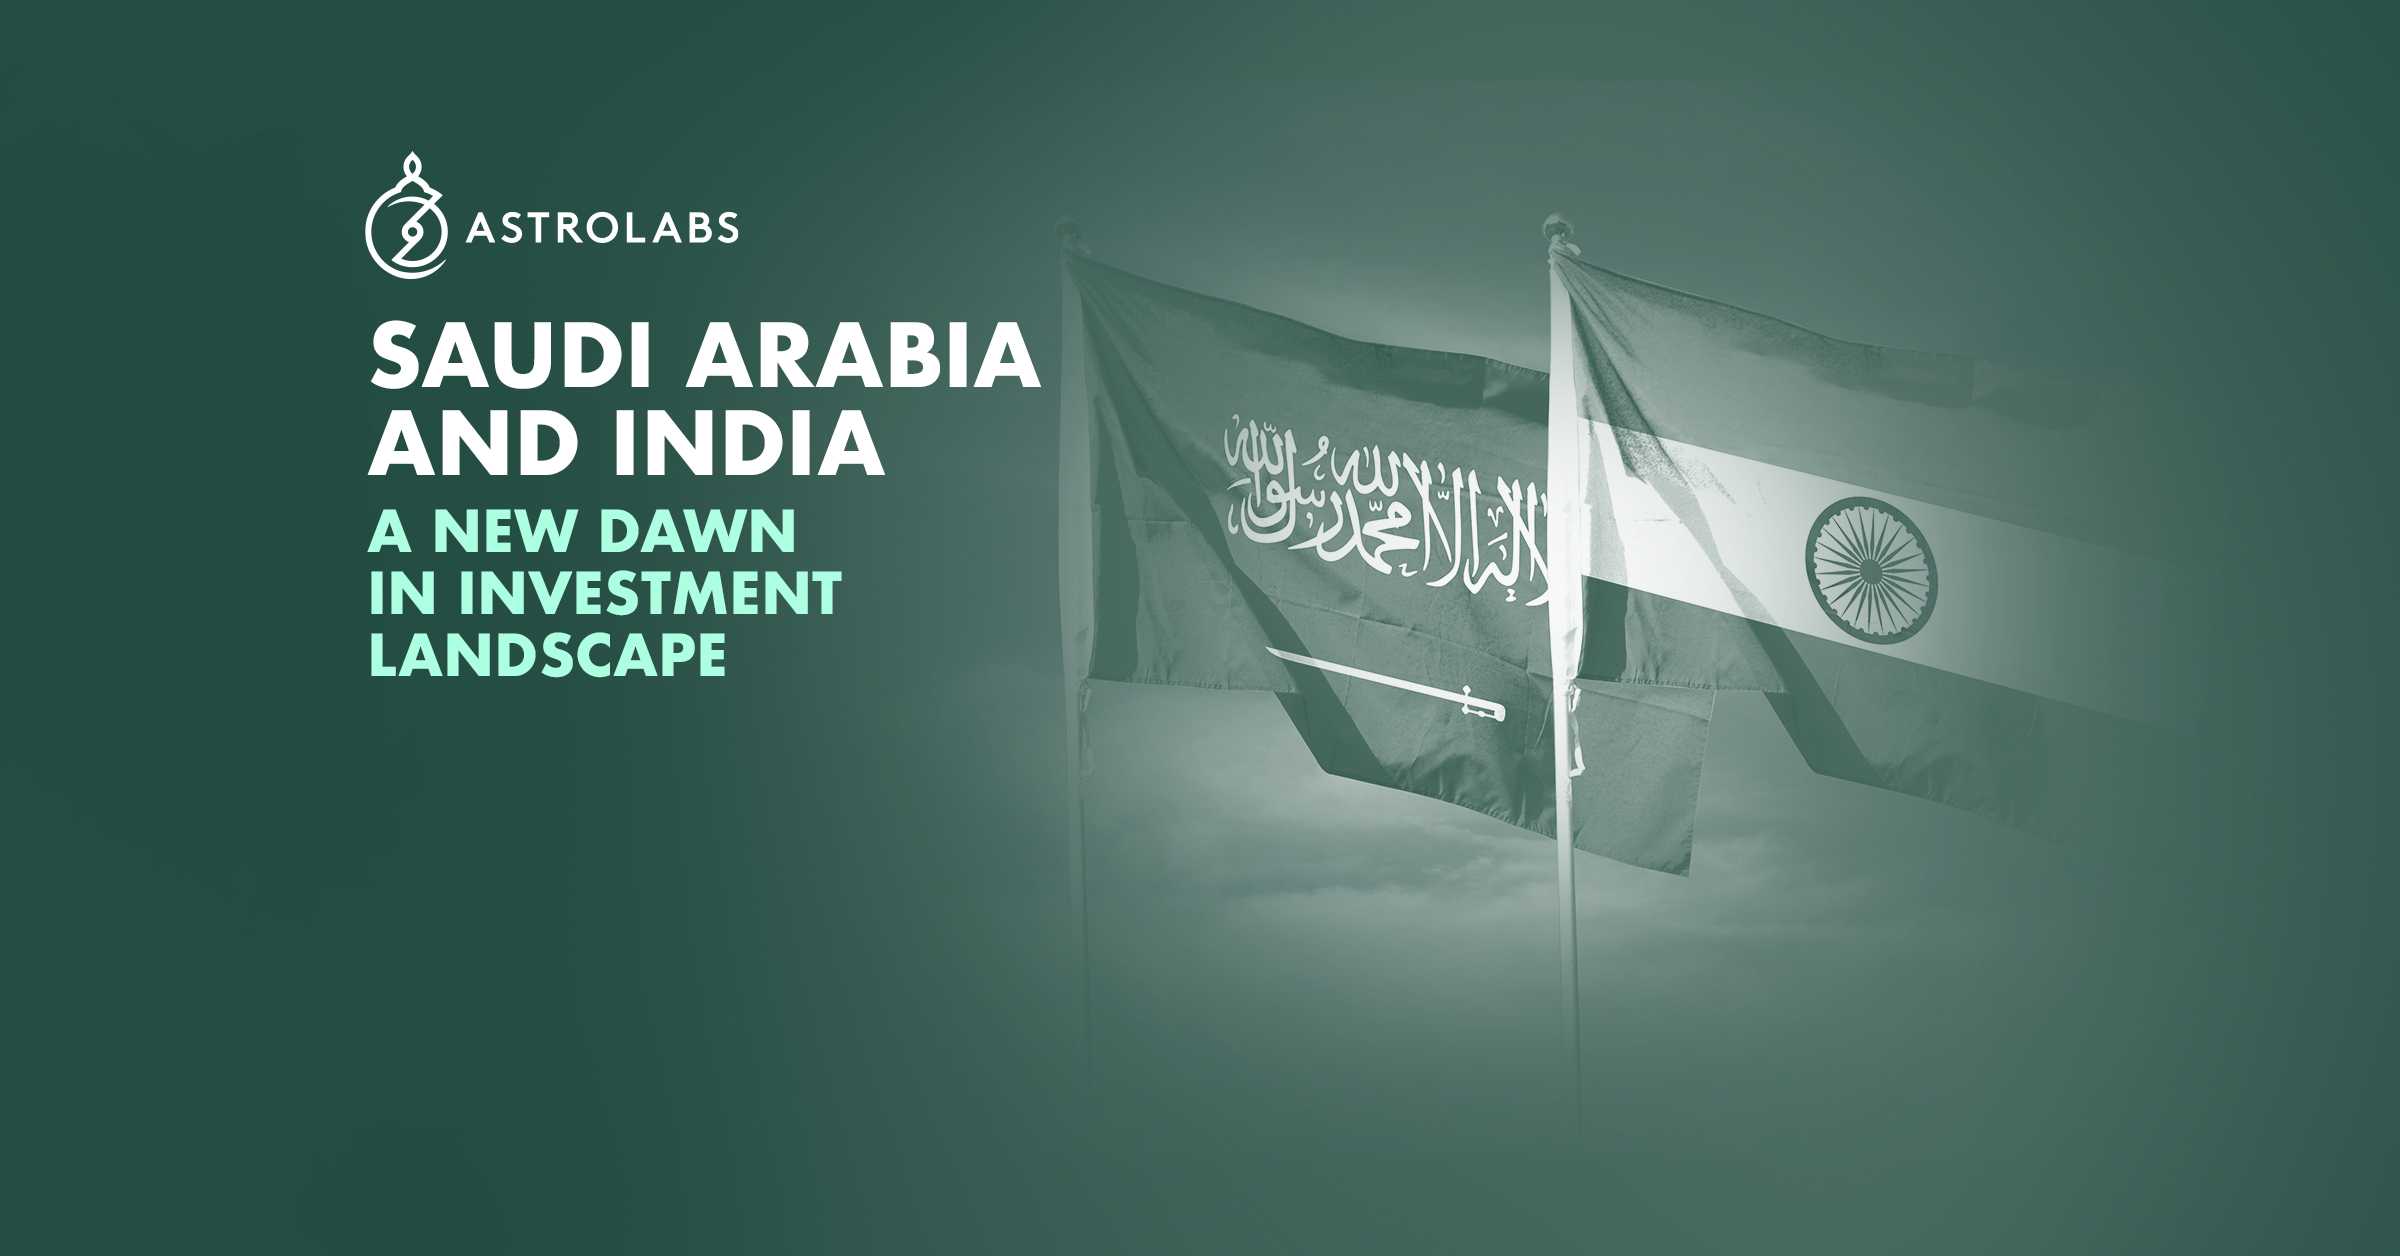 Saudi Arabia and India: A New Dawn in Investment Landscape